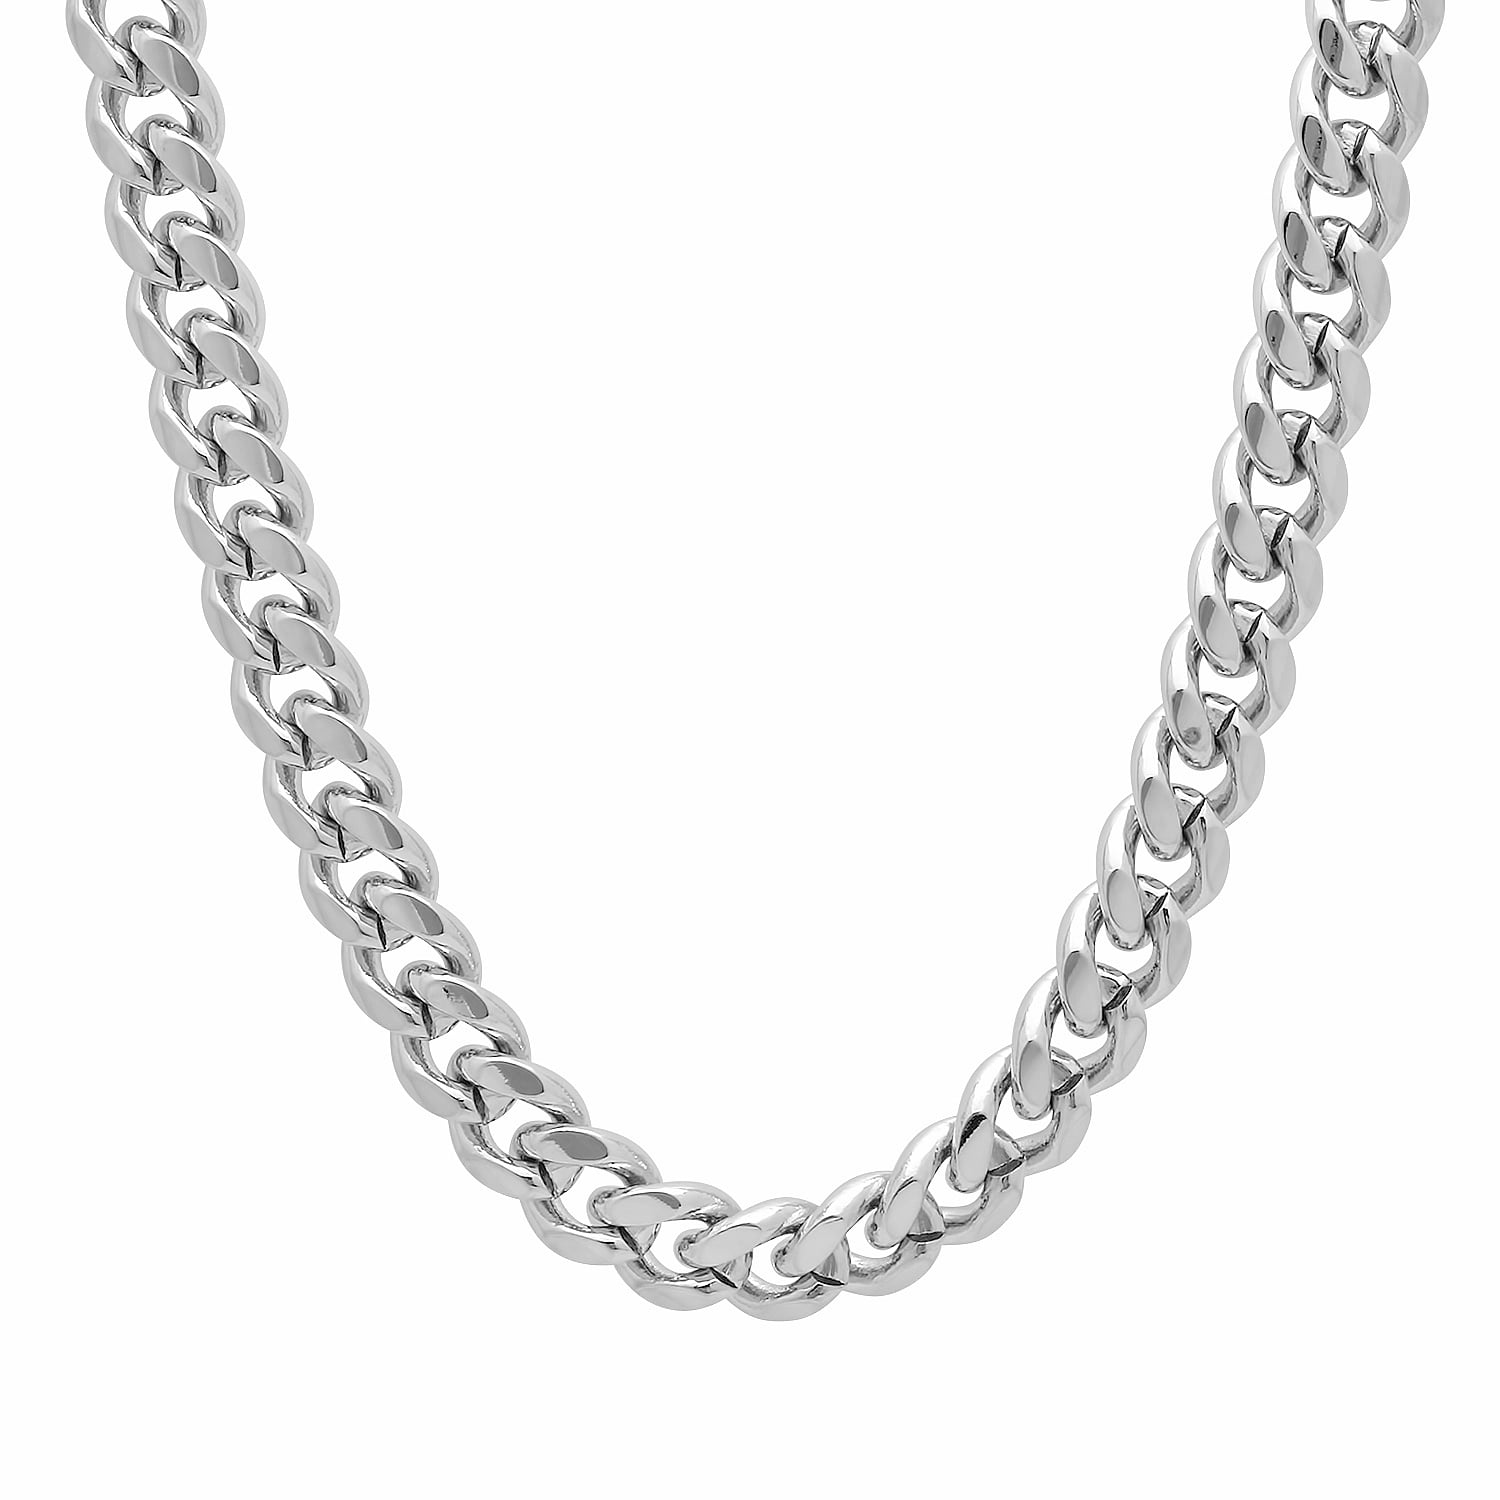 The Bling Factory - Men's 9mm Large Rhodium Plated Flat Cuban Link Curb ...